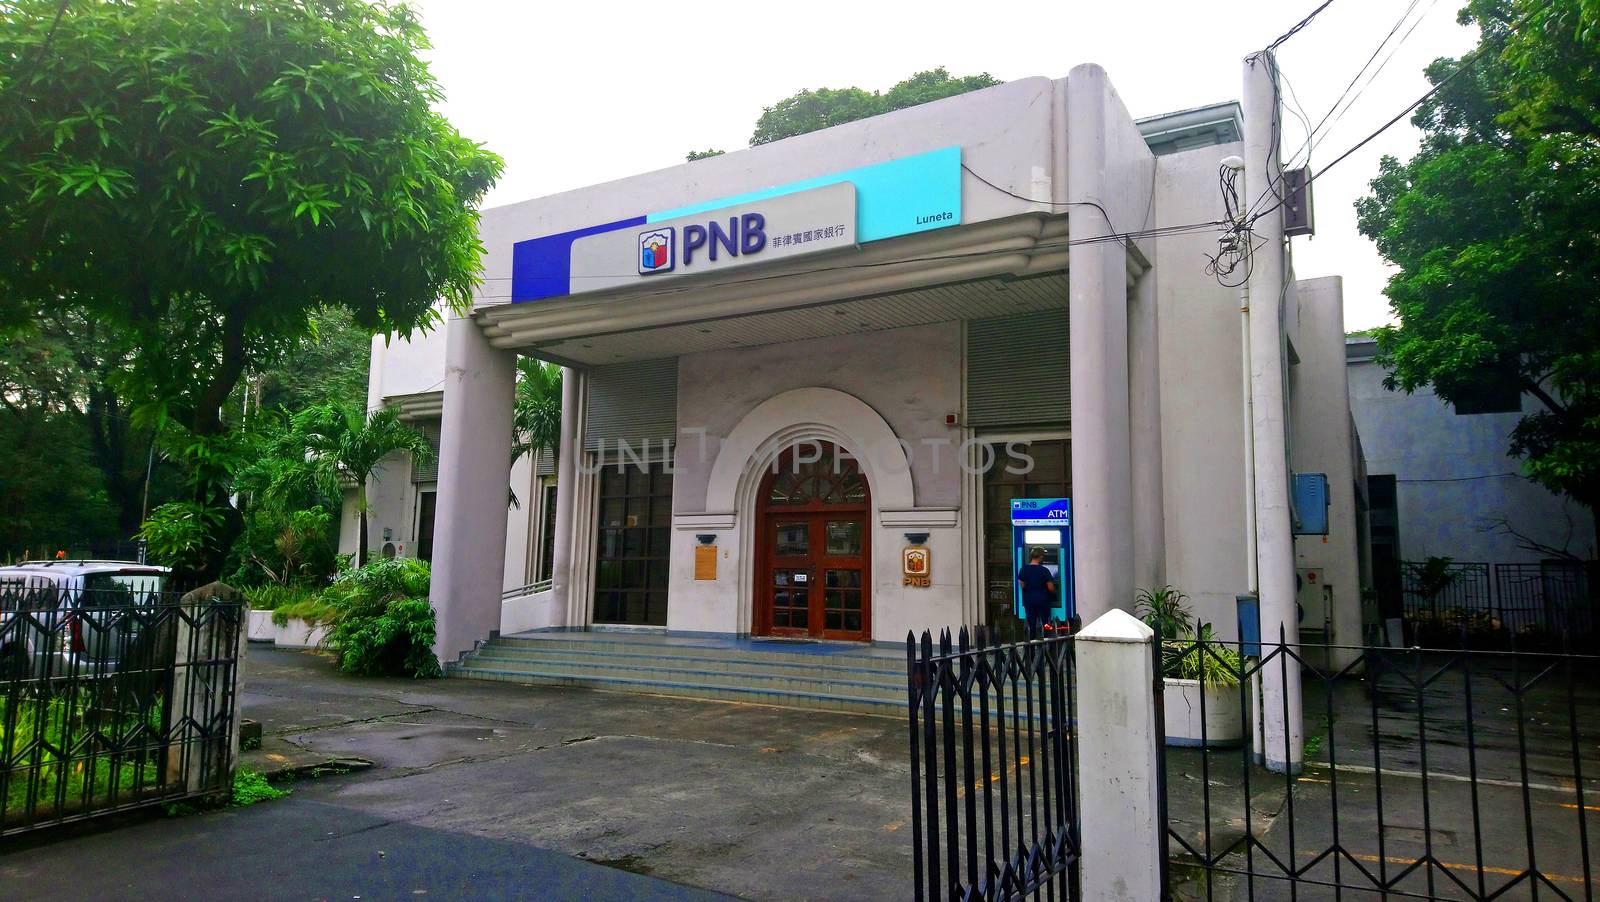 Philippine National Bank facade in Manila, Philippines by imwaltersy